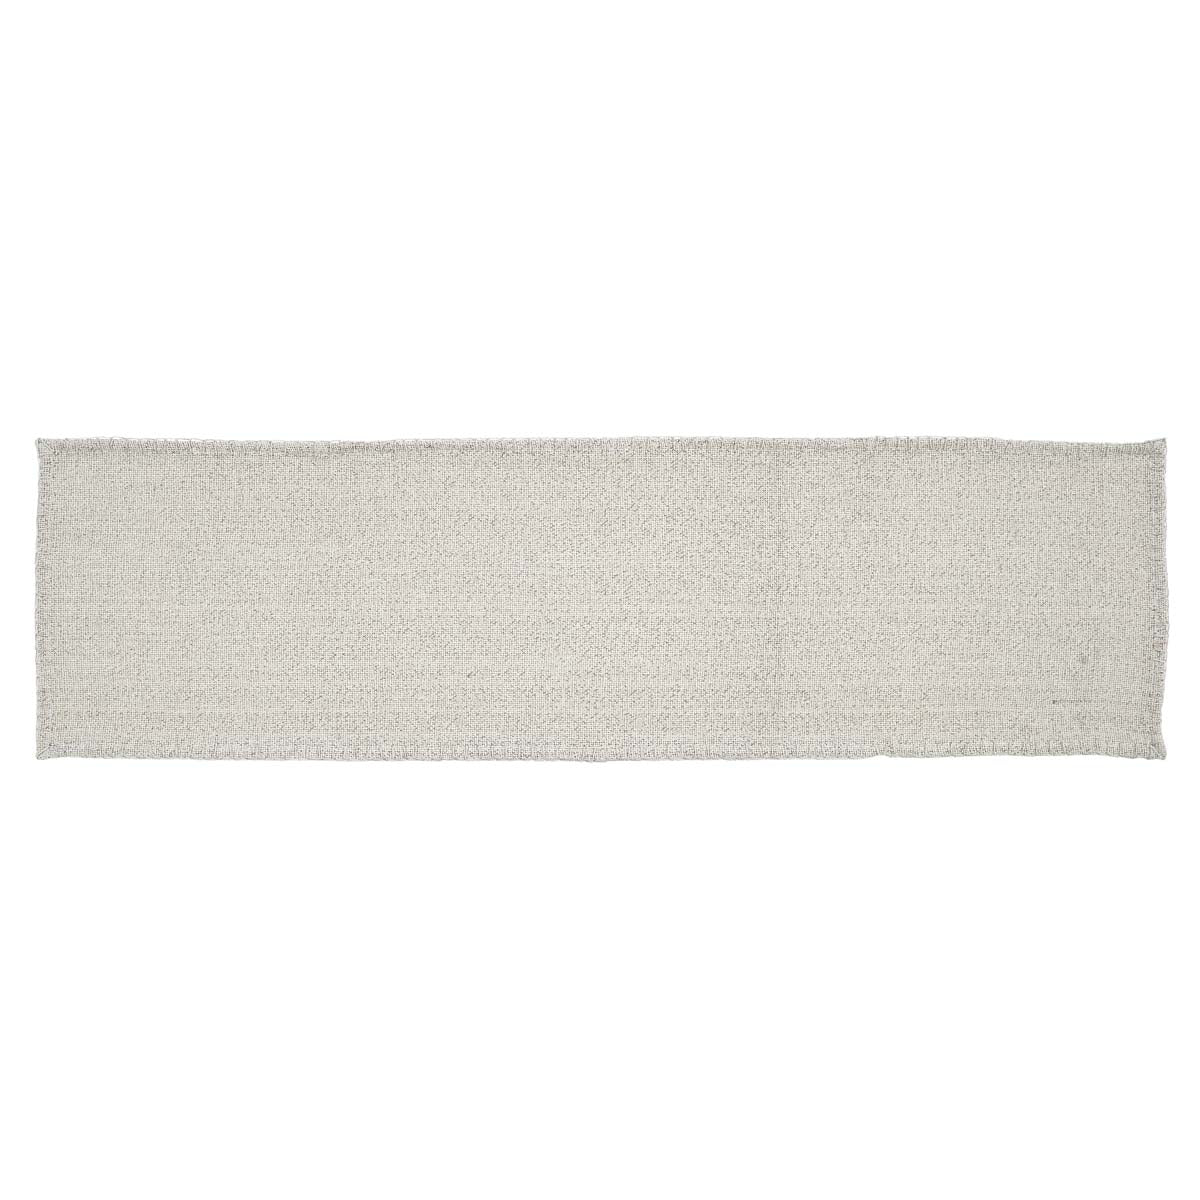 💙 Nowell Creme Table Runner 13" x 48"